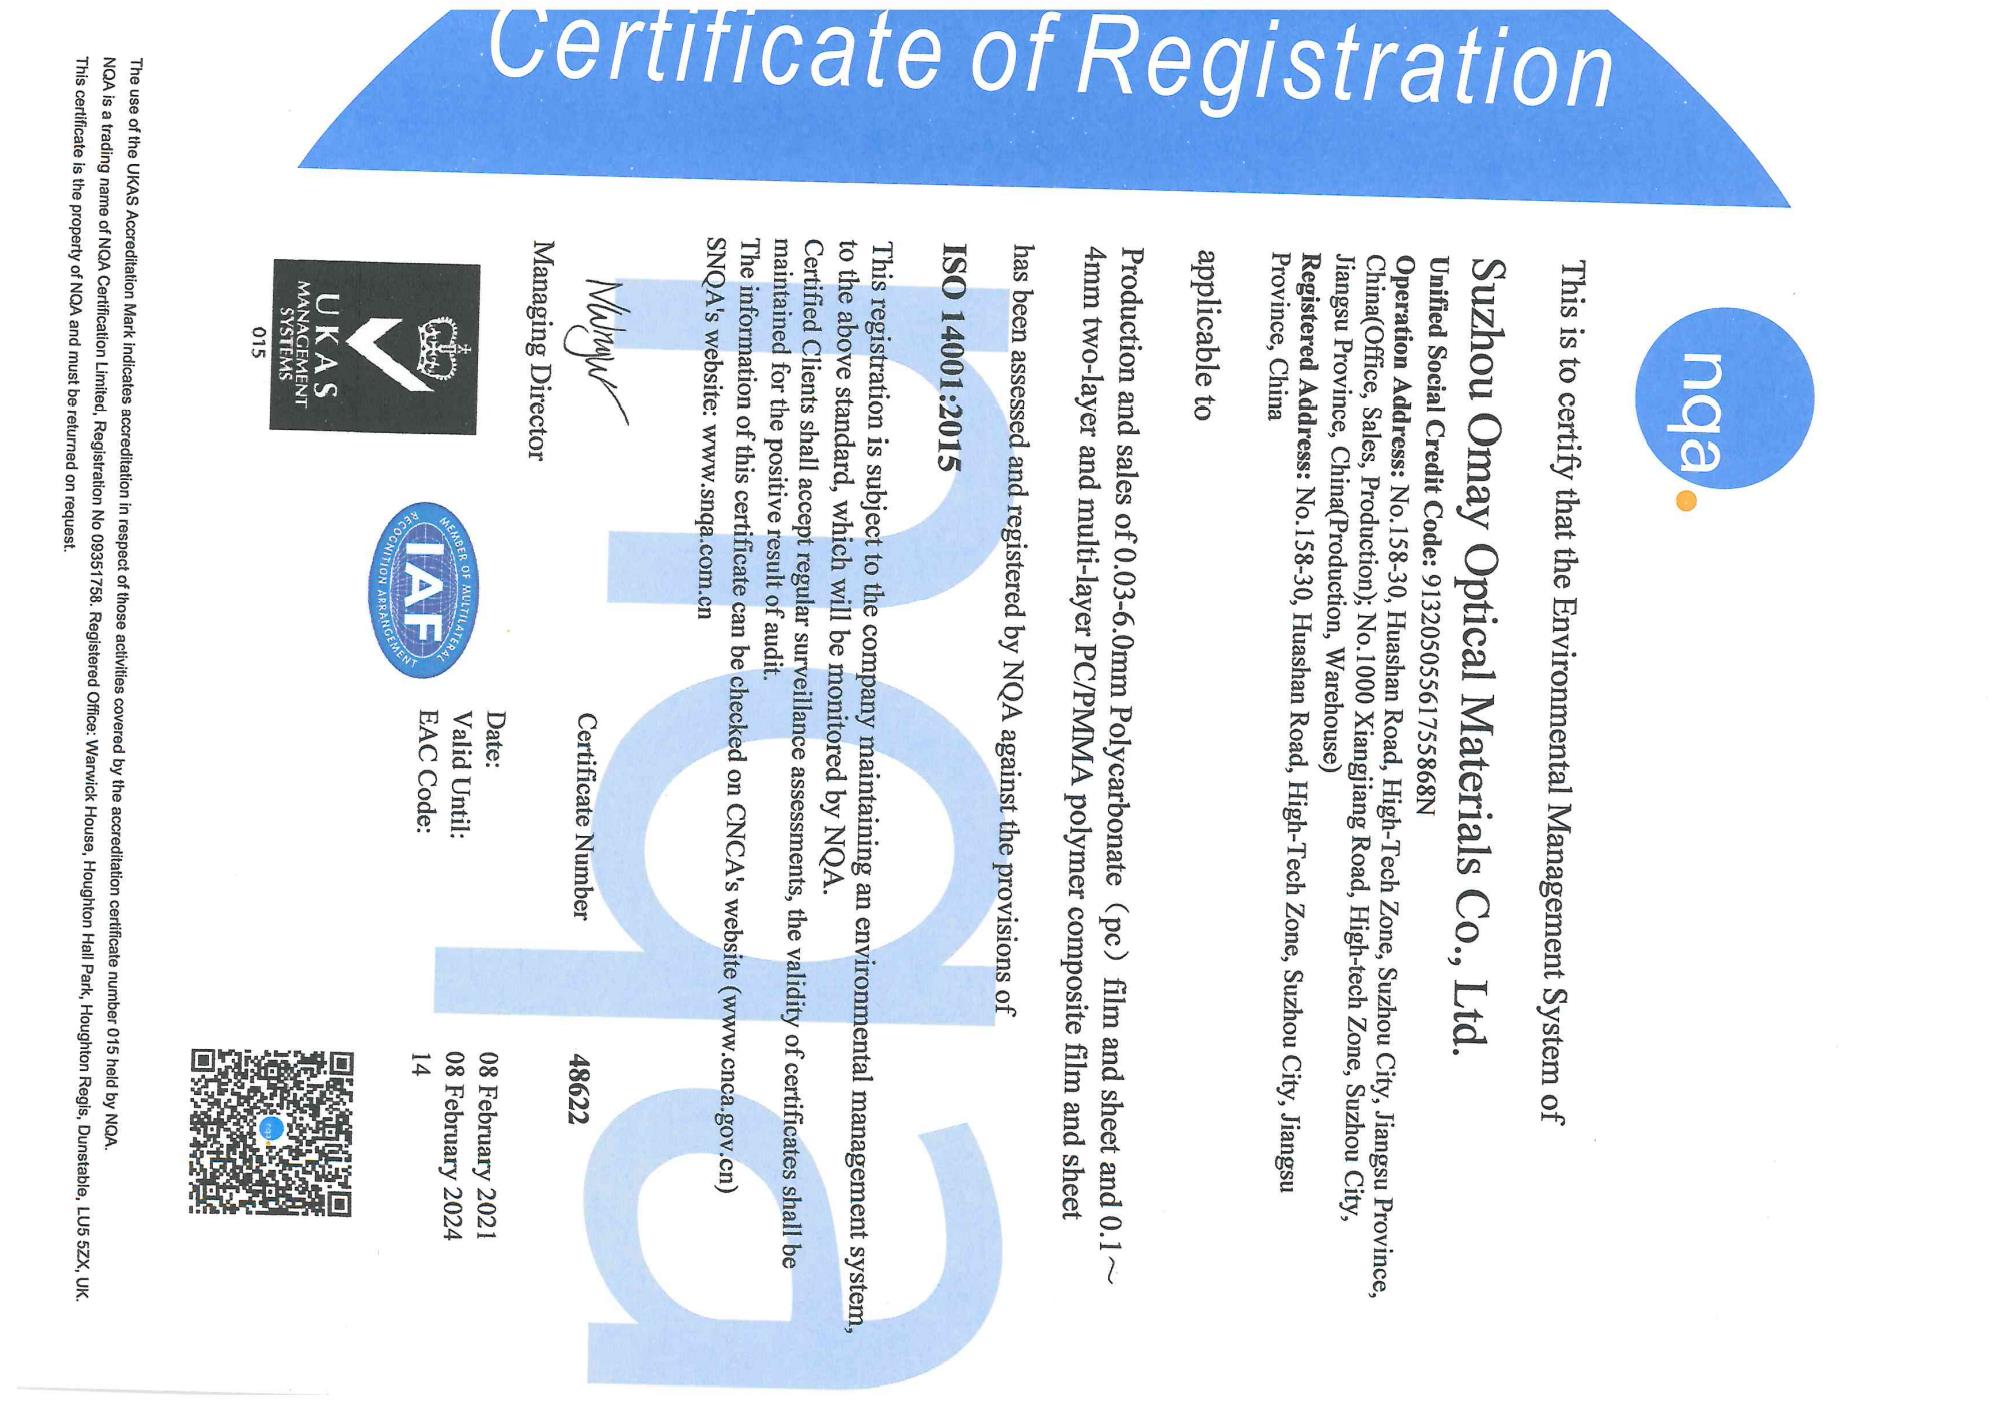 Suzhou Omay Optical Materials Co.,Ltd passed the ISO and IATF recertification audit